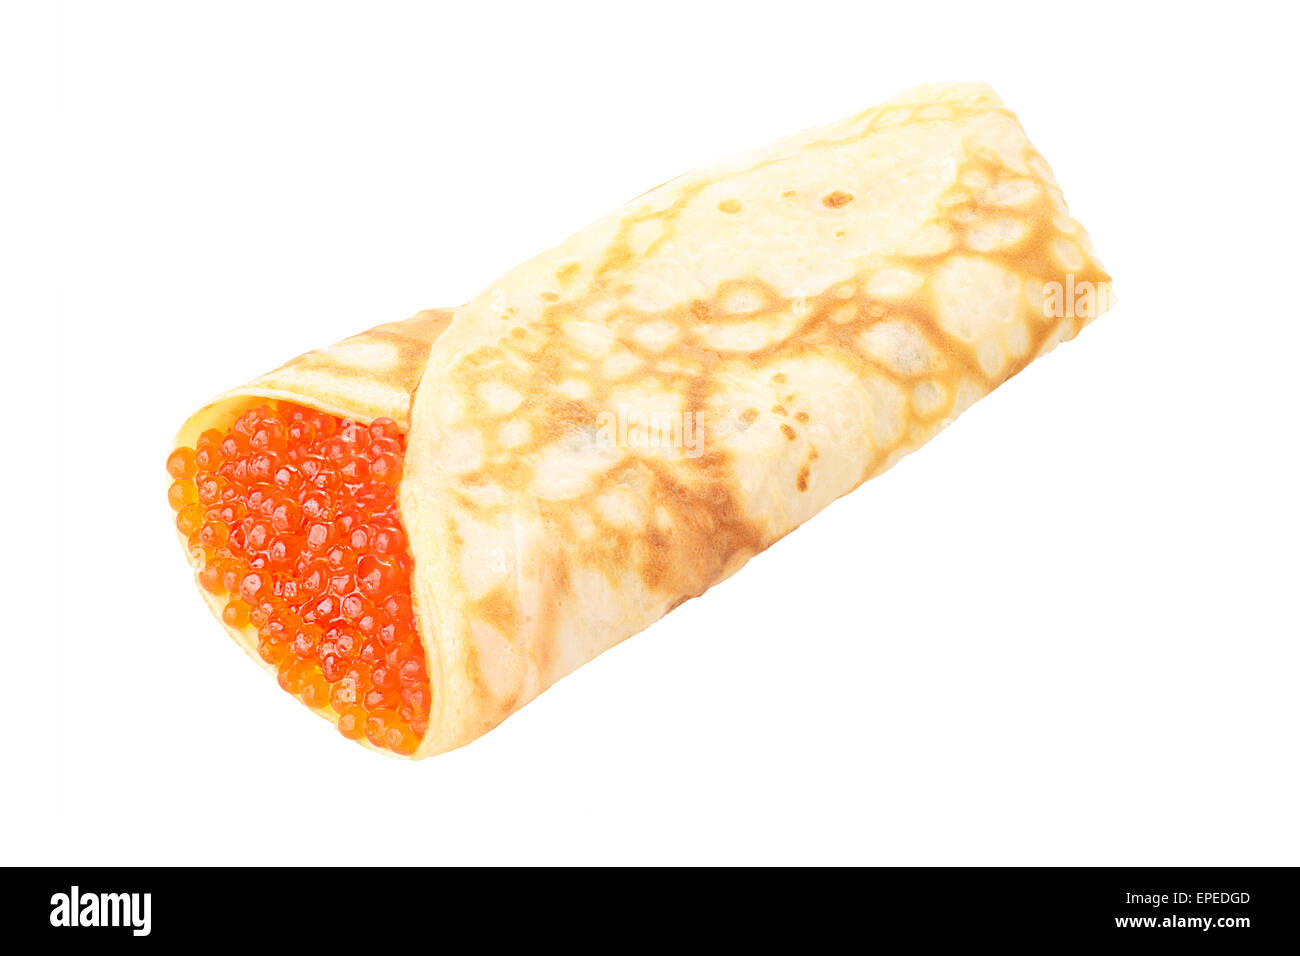 Elegant, neat,hearty crepe stuffed with red caviar isolated on white shadowless. Stock Photo